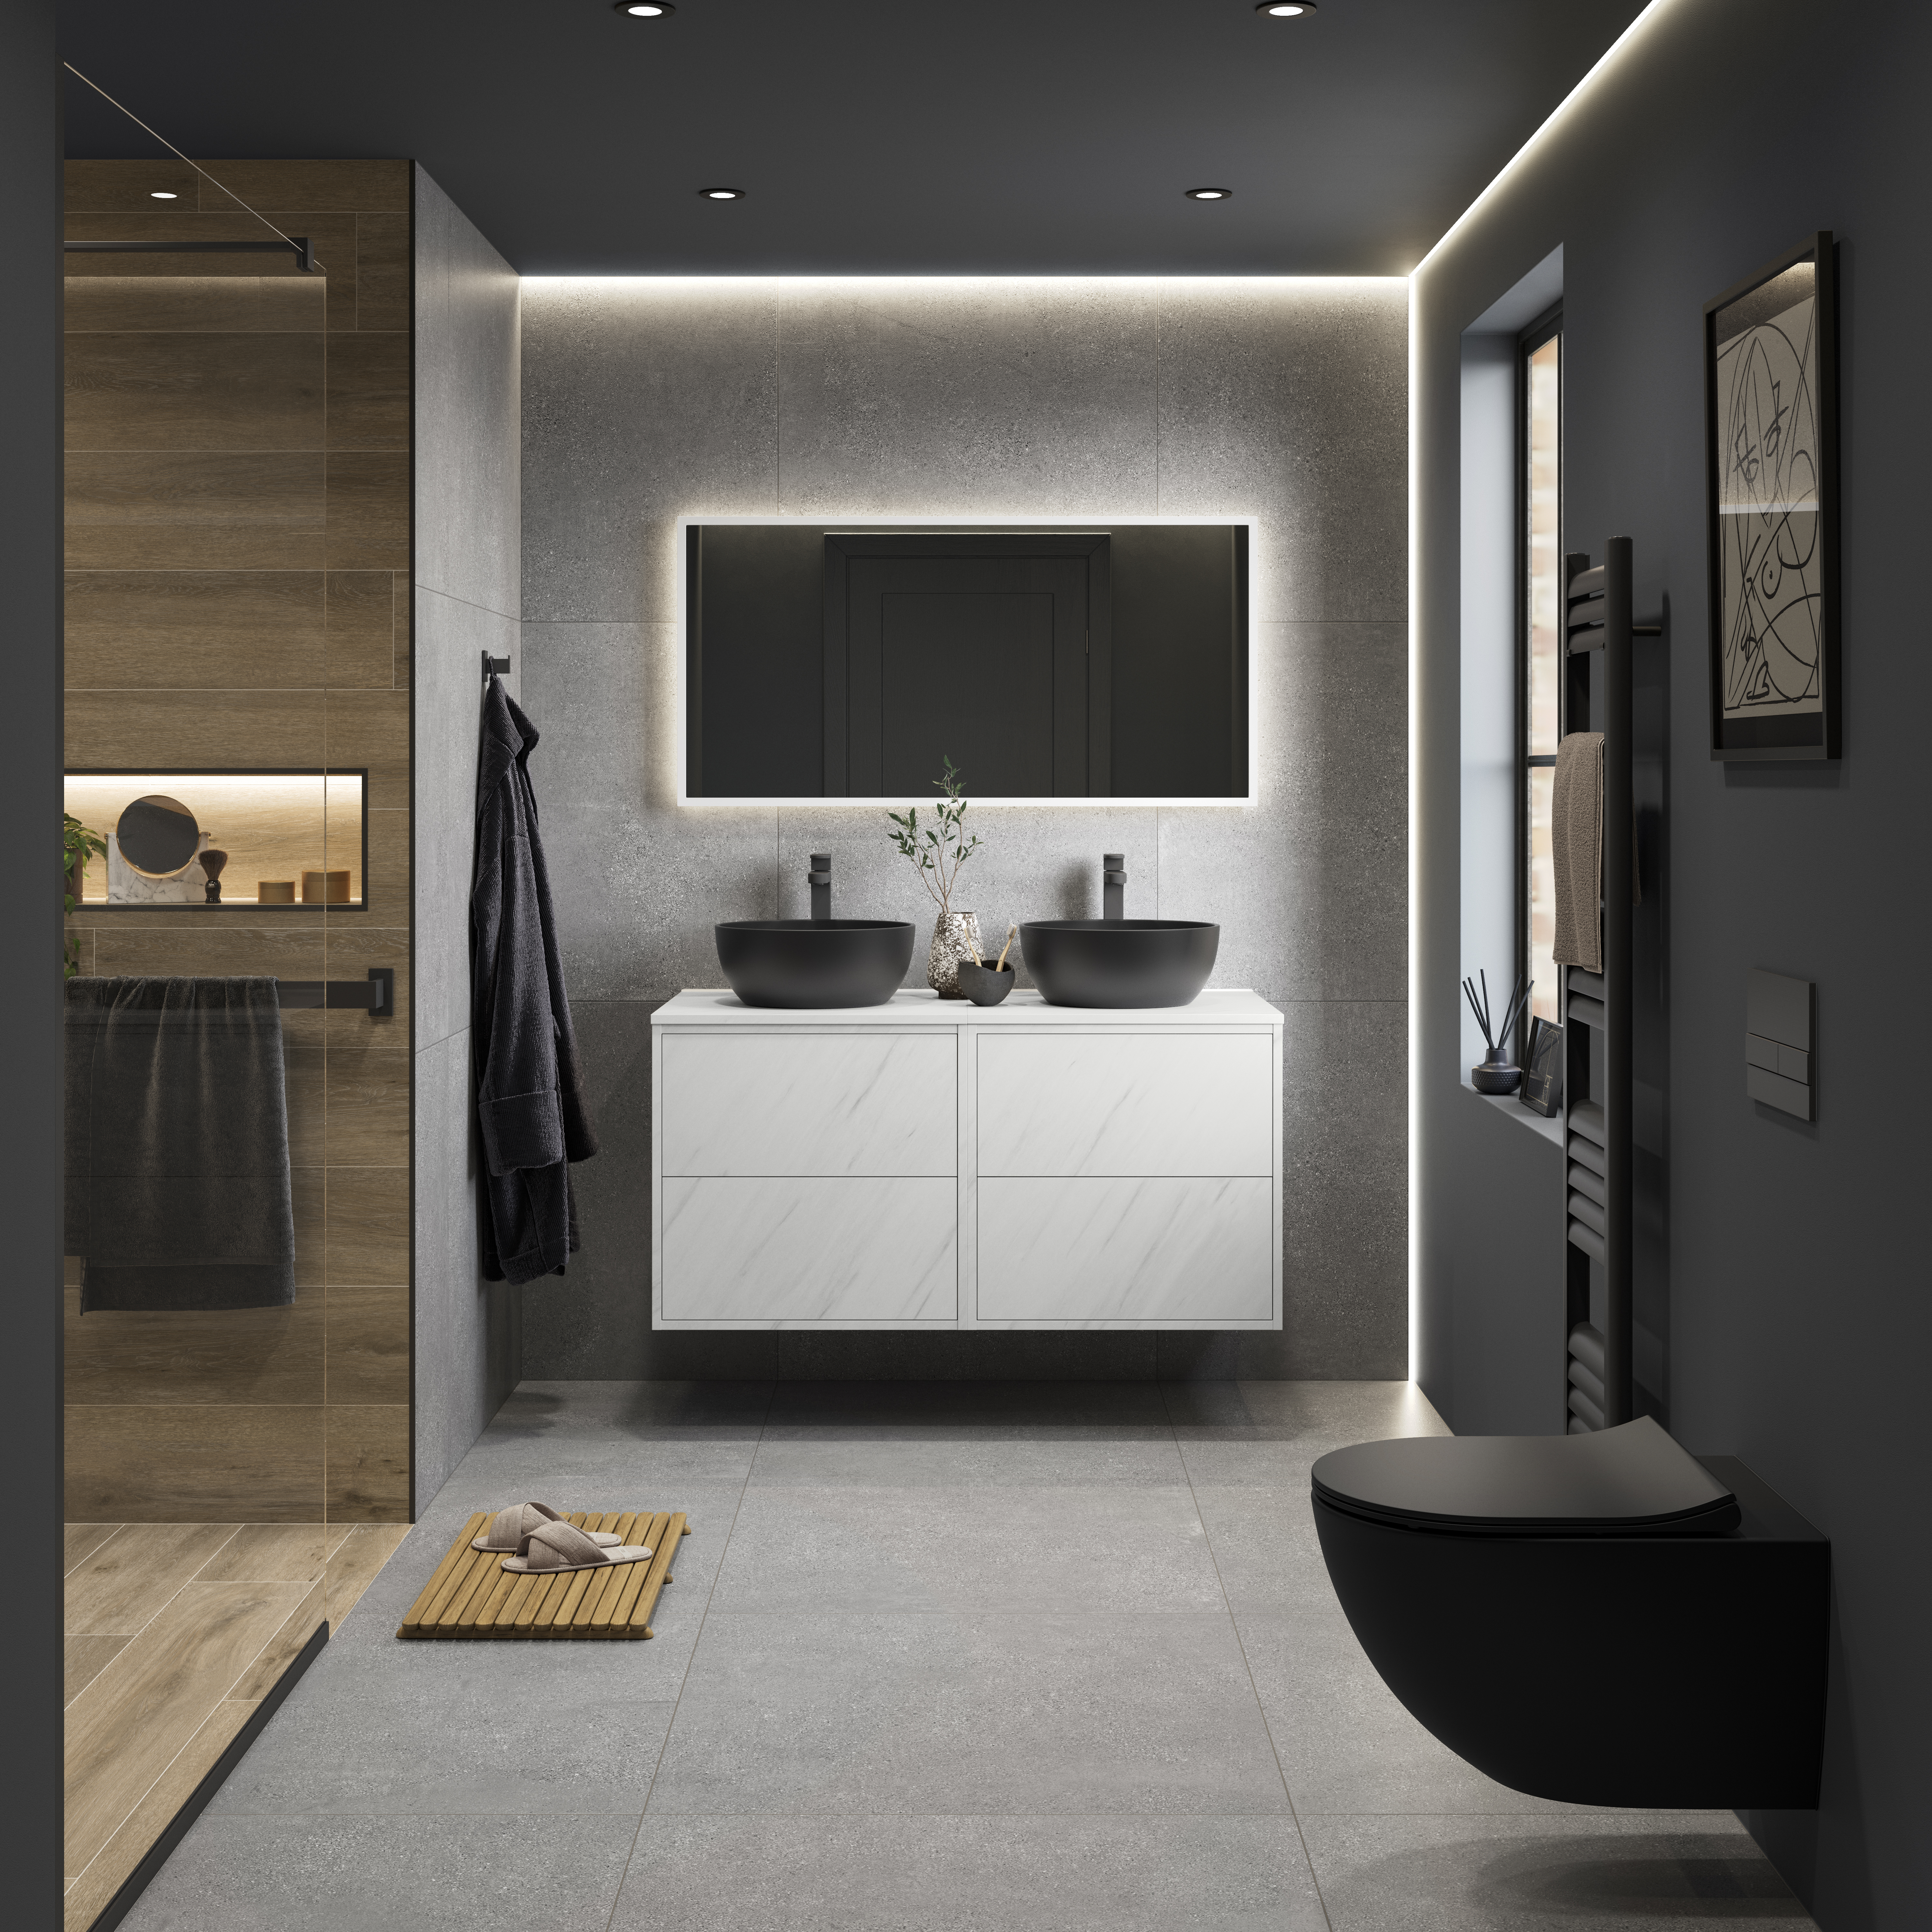 Image of Wickes Boutique Andora Grey Glazed Porcelain Wall & Floor Tile - 790 x 790mm